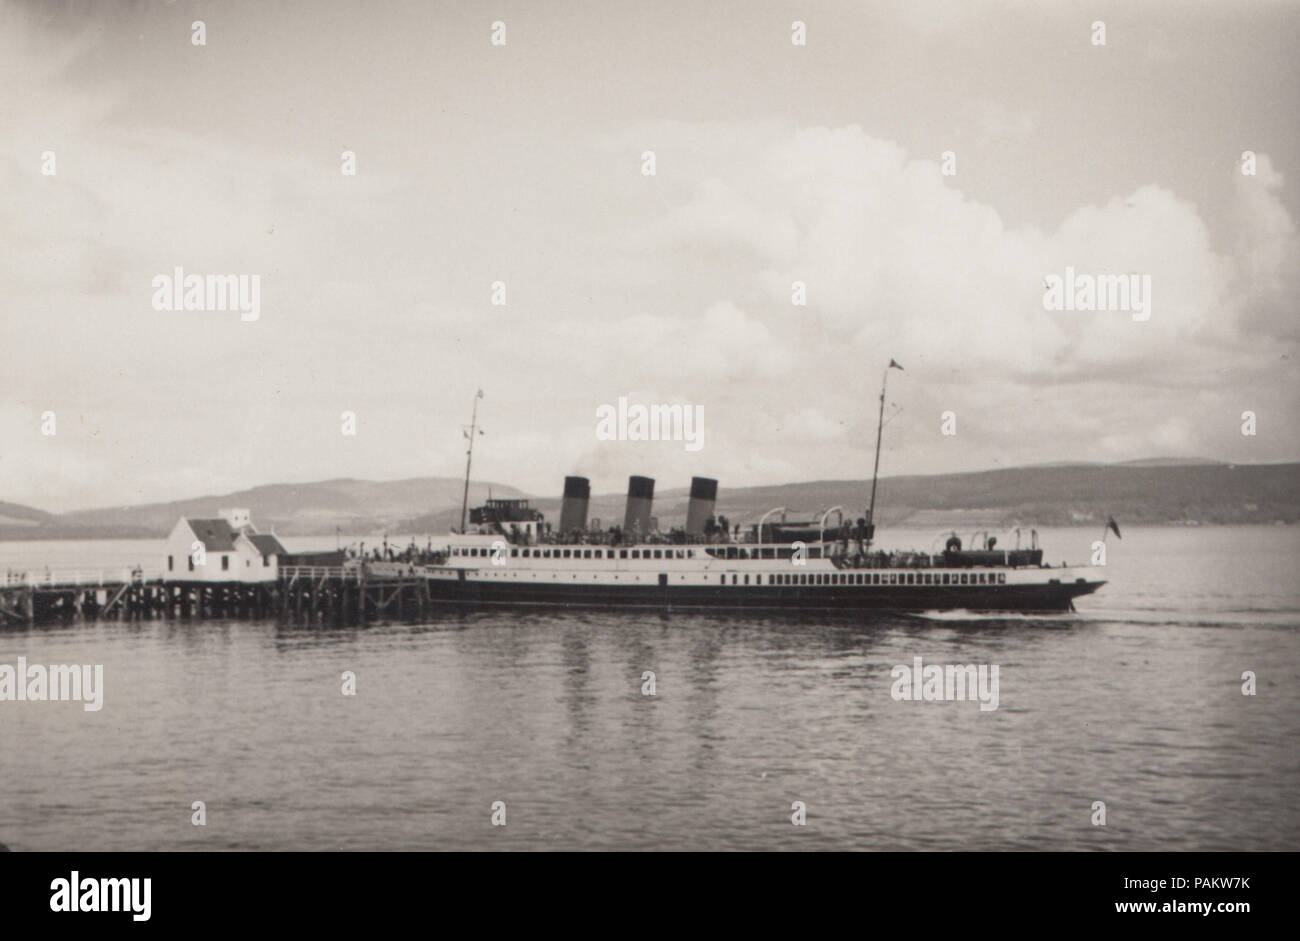 Vintage Photograph of a Steam Passenger Boat Stock Photo